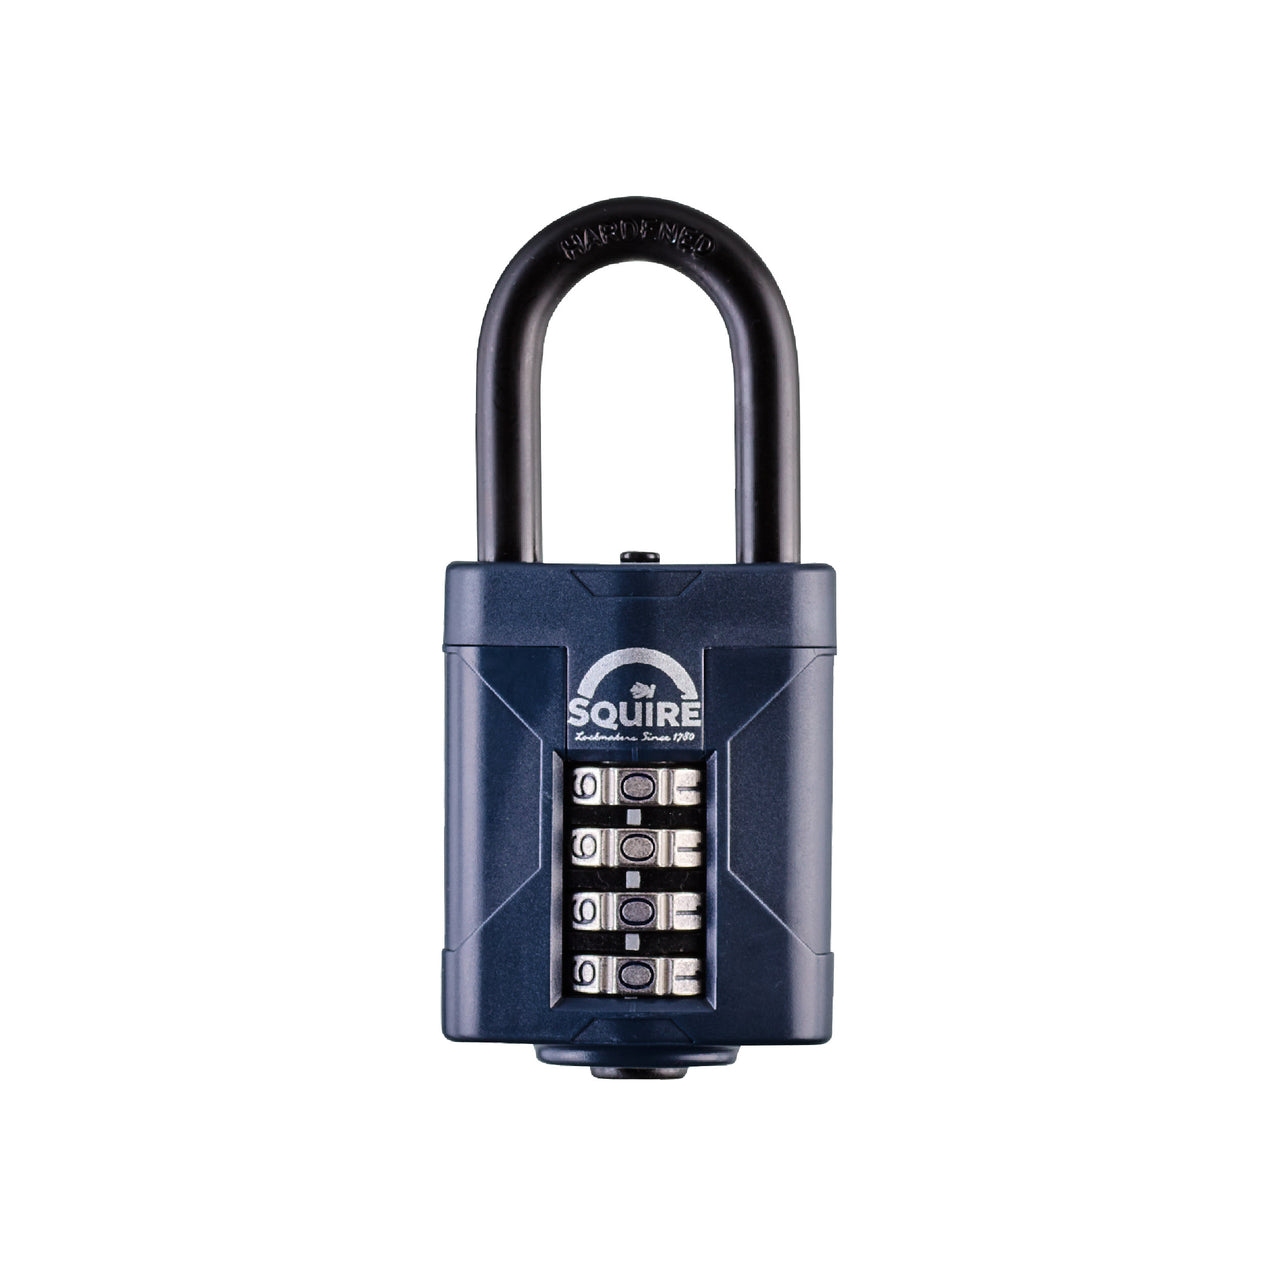 Squire CP50/1.5 Combination Padlock 1.5inch Long Shackle